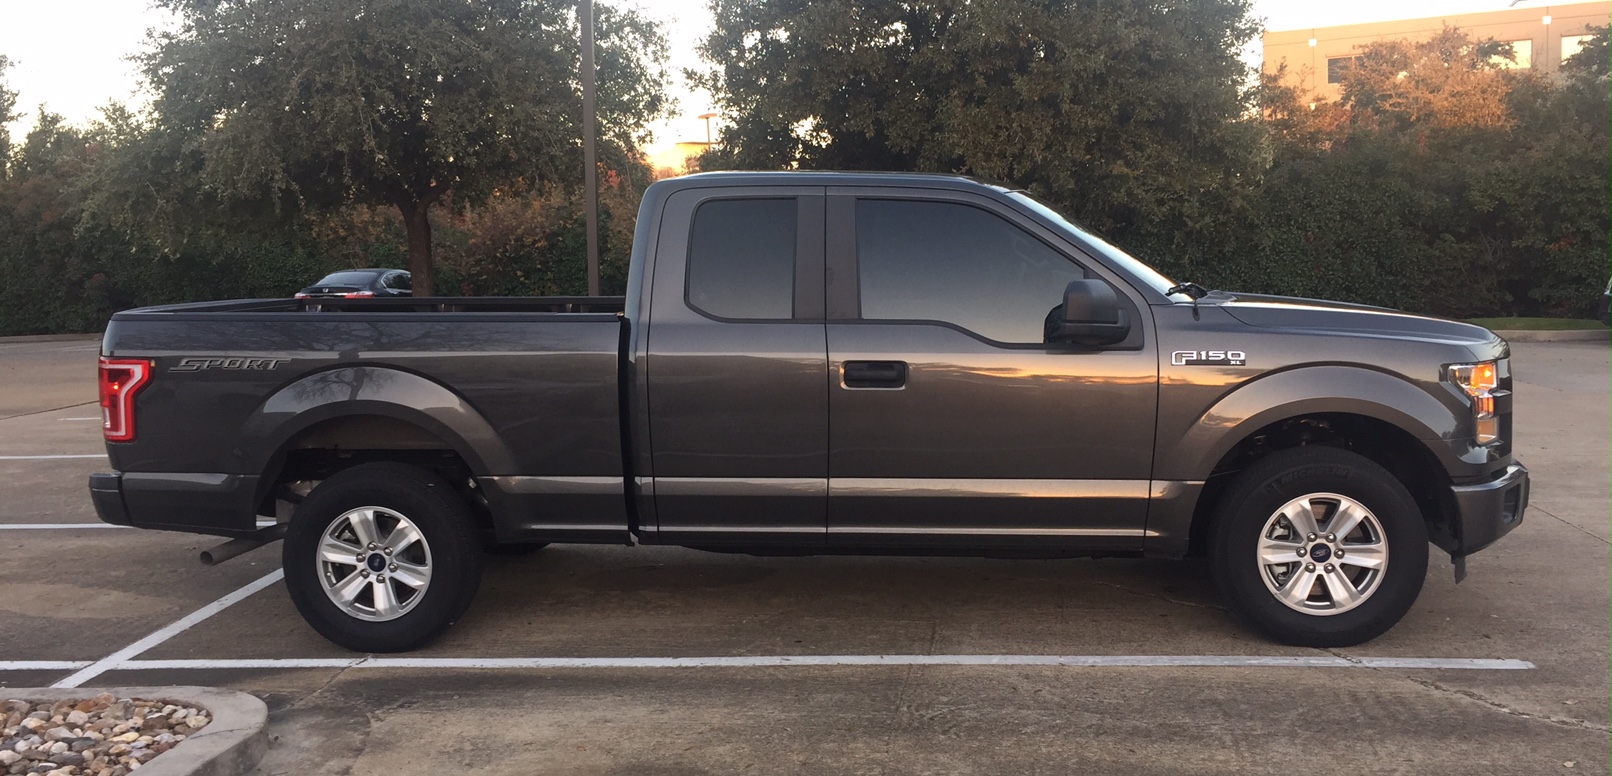 What Size Leveling Kit For 2015 F150 2wd Ford F150 Forum